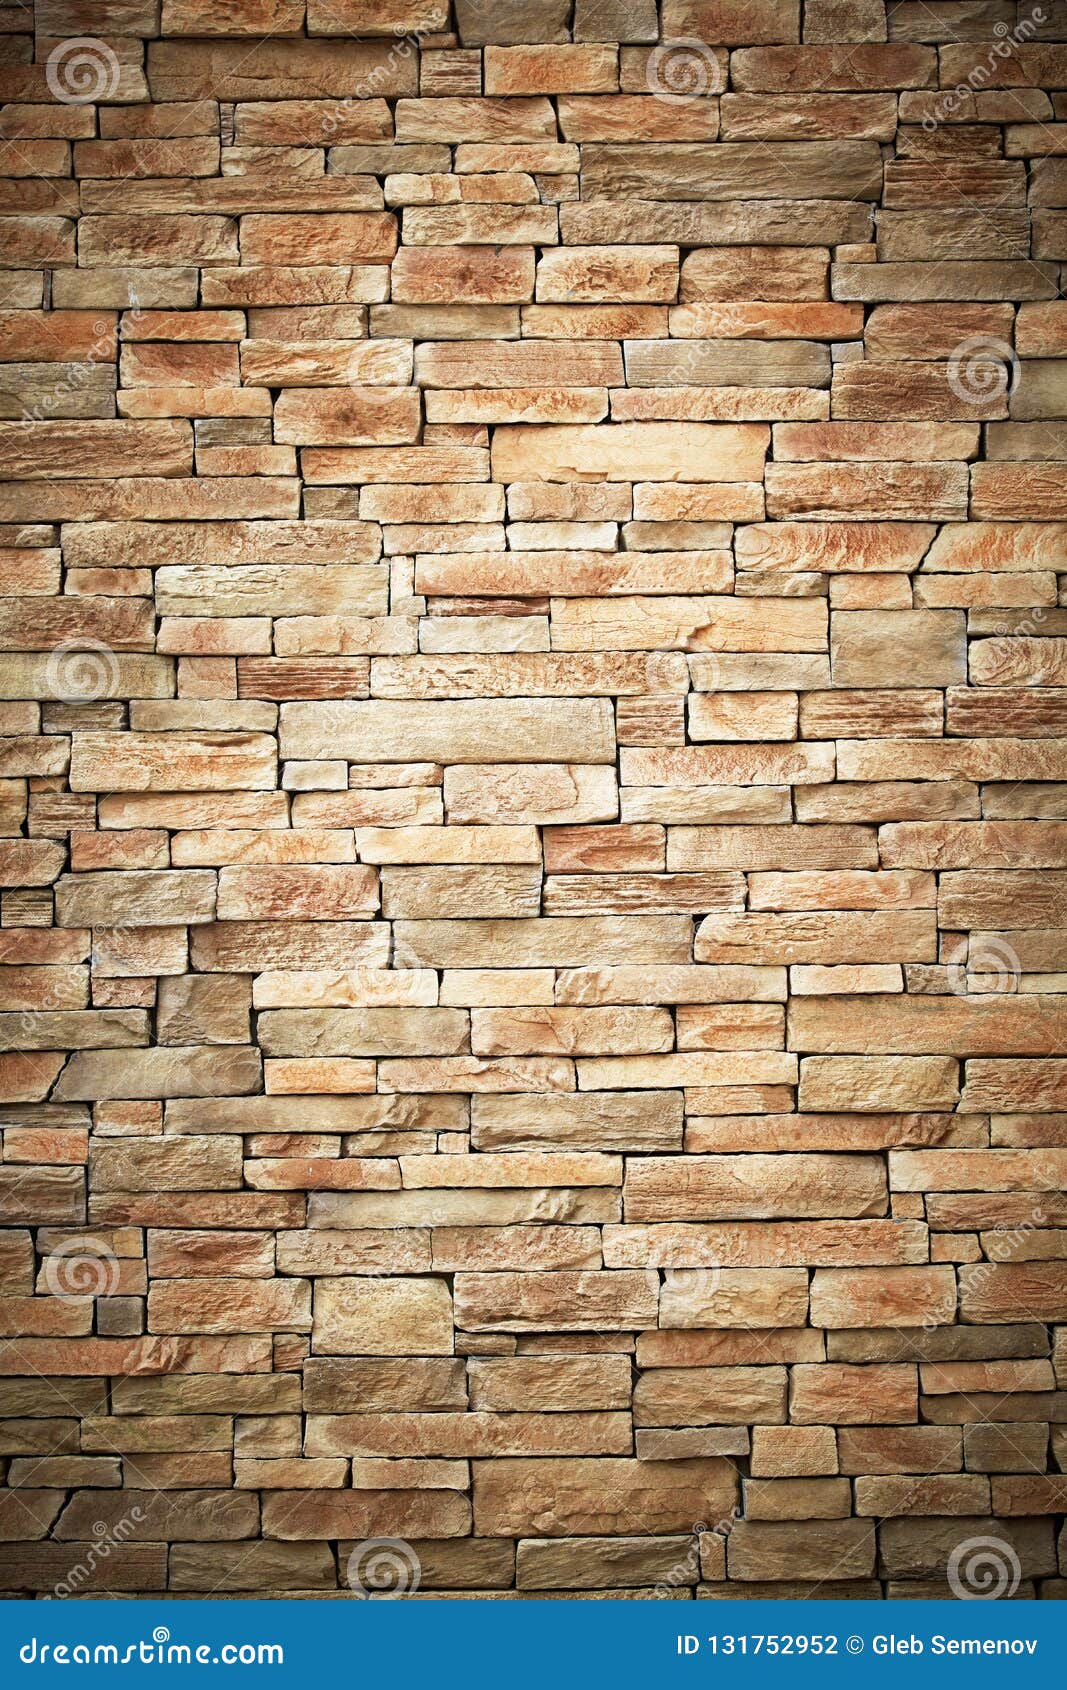  Wall  Of Stone Beige  Surface Bricks  As A Background Stock 